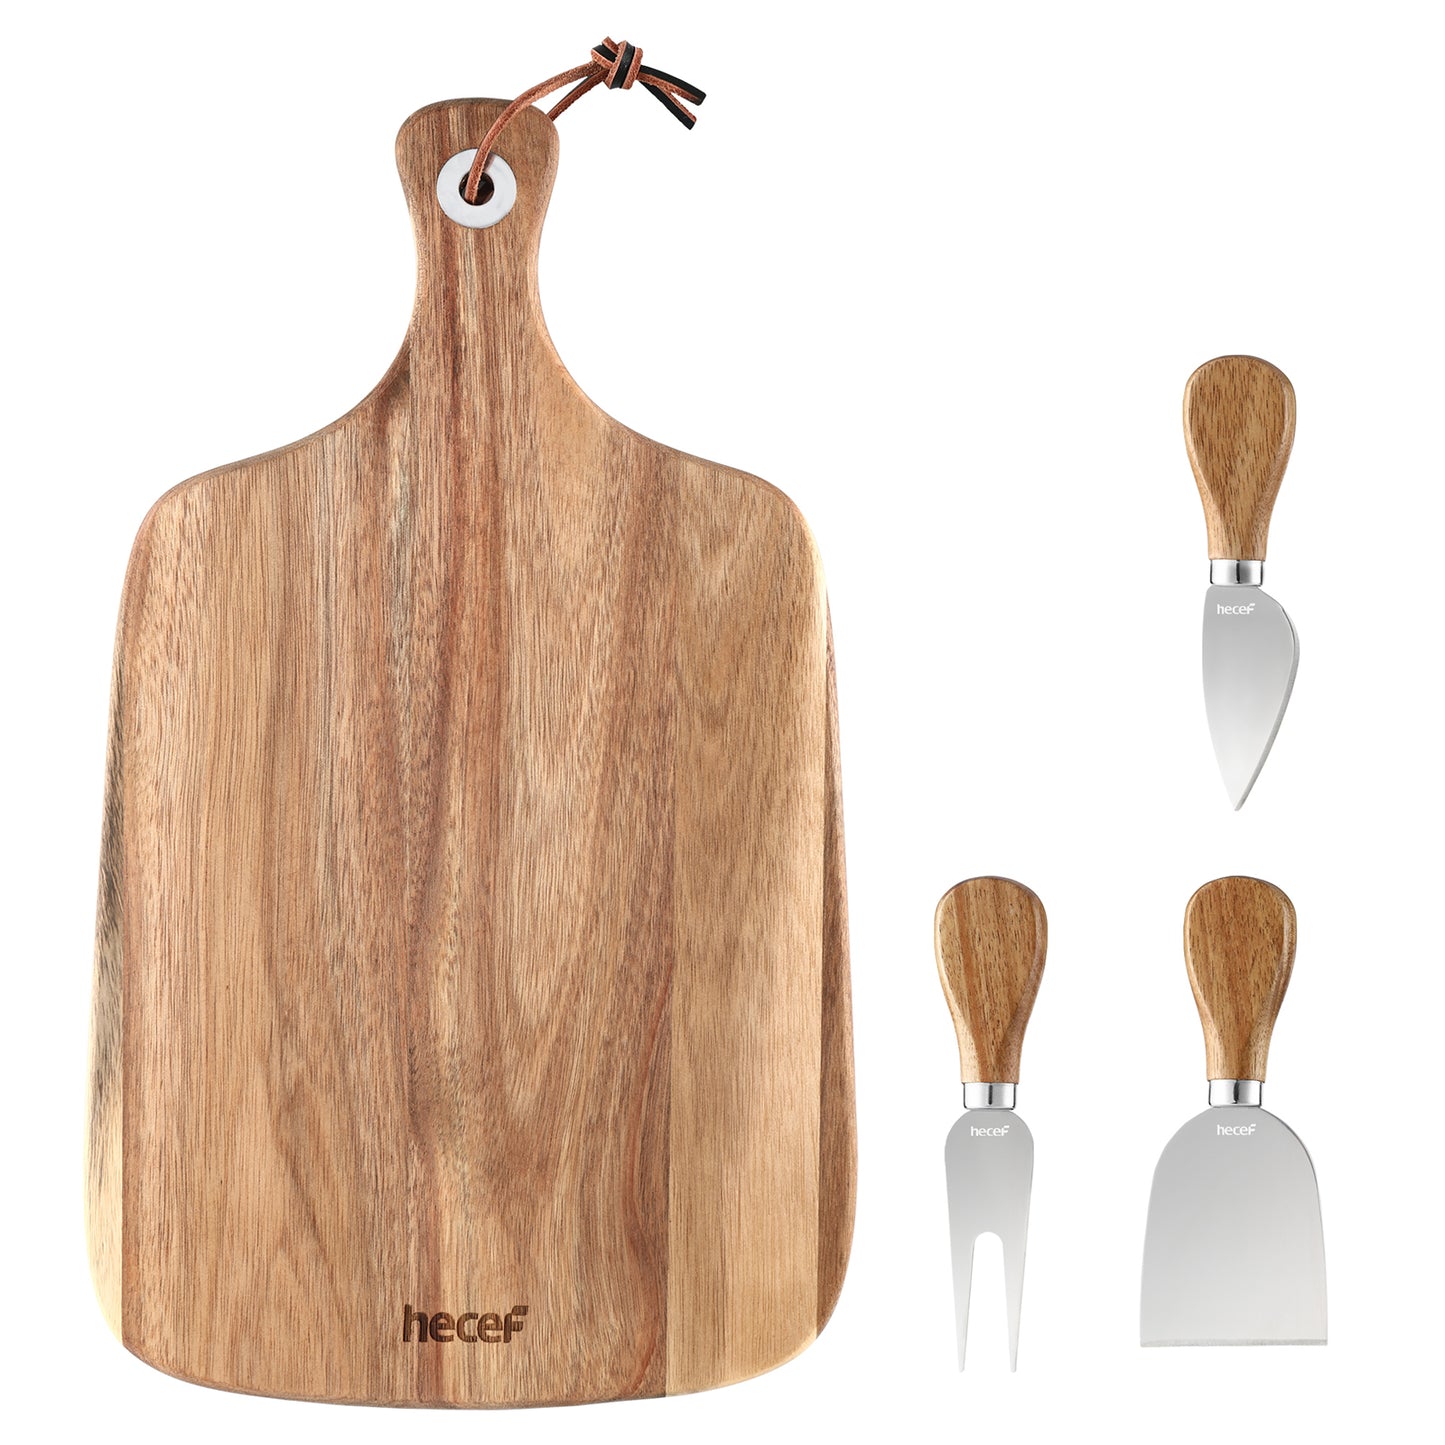 Upgrade 4 Pcs Acacia Wood Cheese Cutting Charcuterie Board Meat Fruit & Crackers - Hecef Kitchen